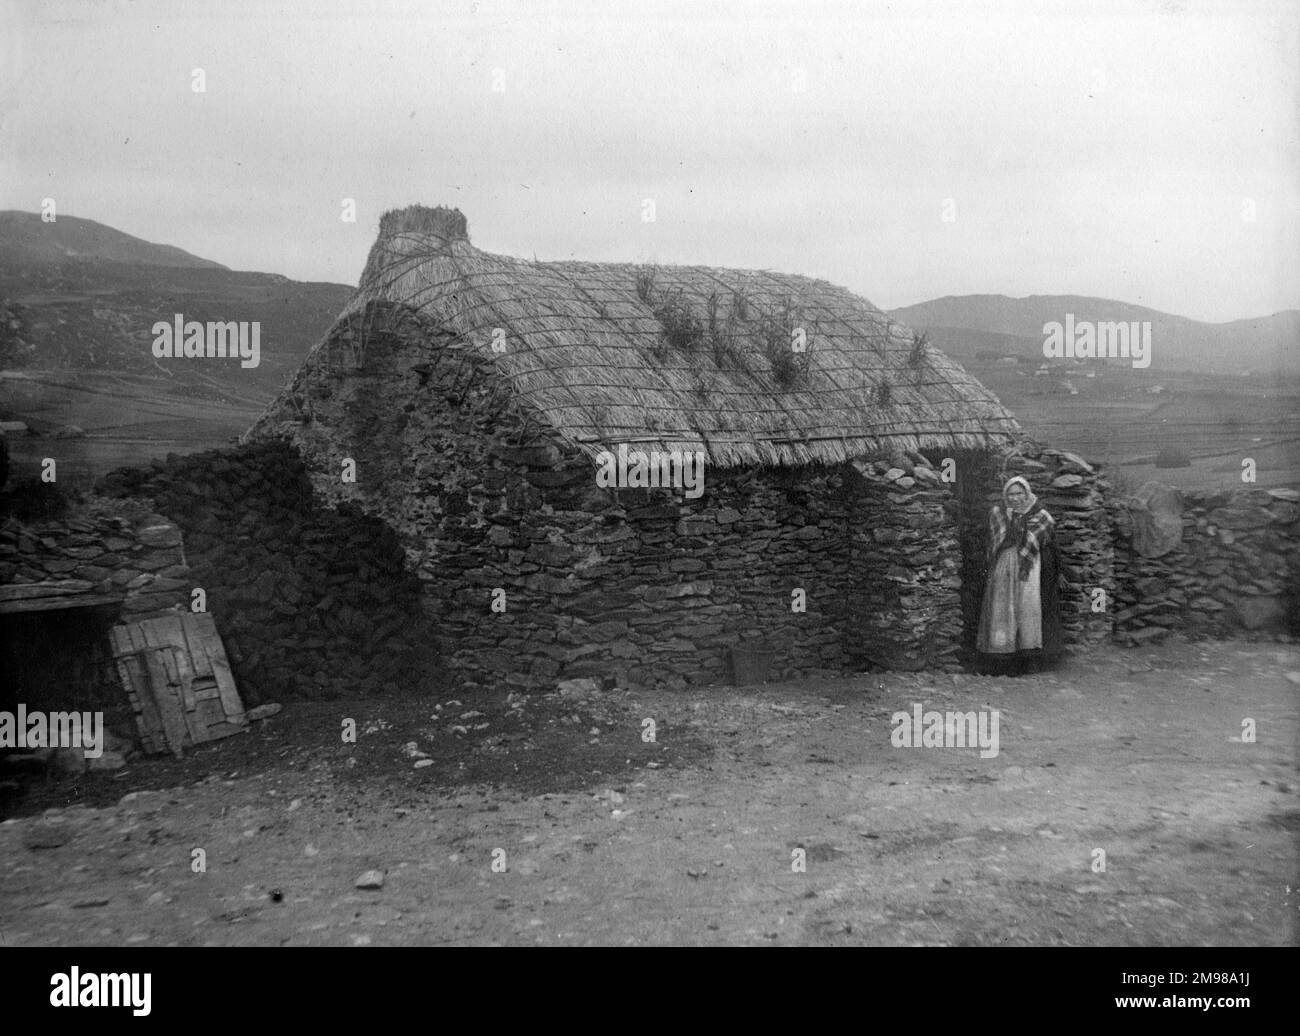 Single-room cottage with a woman standing at the door in Glen Columbkille (Glencolmcille, Gleann Cholm Cille), County Donegal, north-west Ireland. Stock Photo